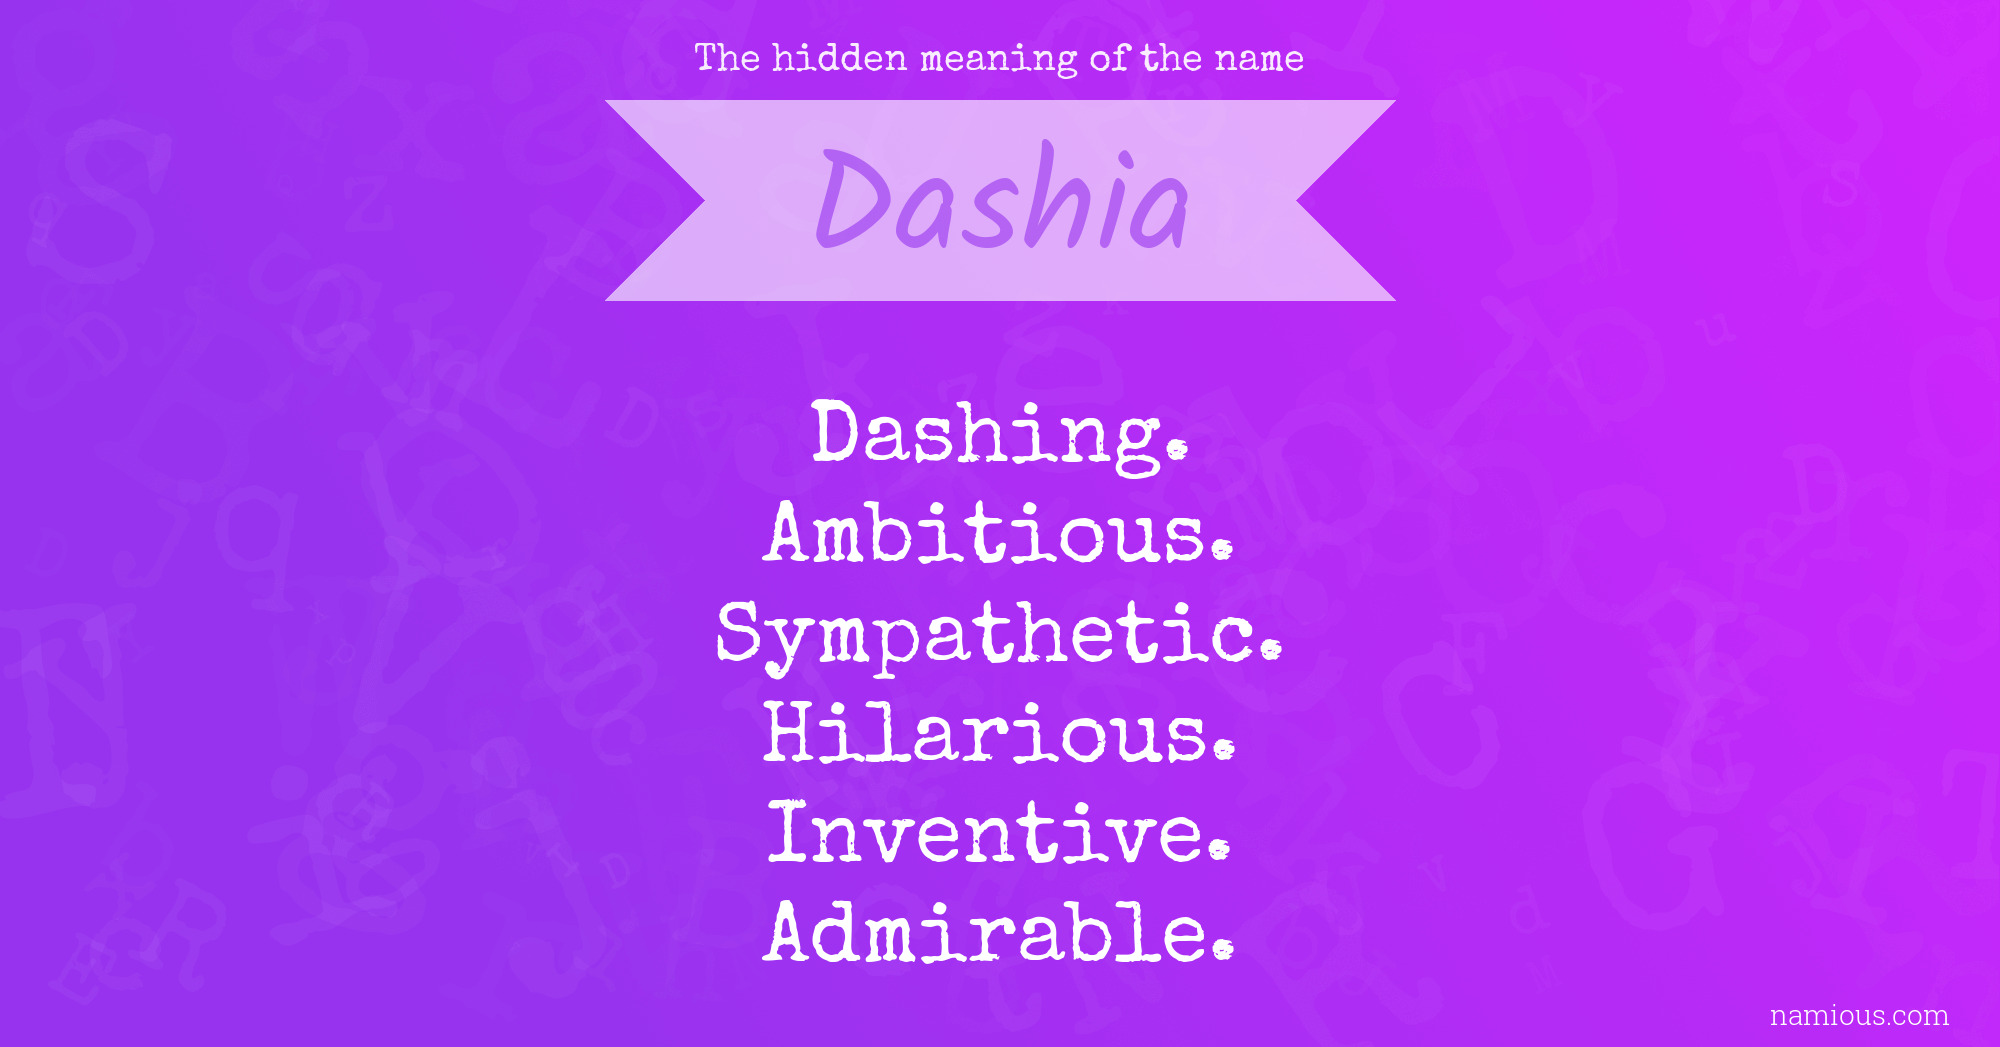 The hidden meaning of the name Dashia